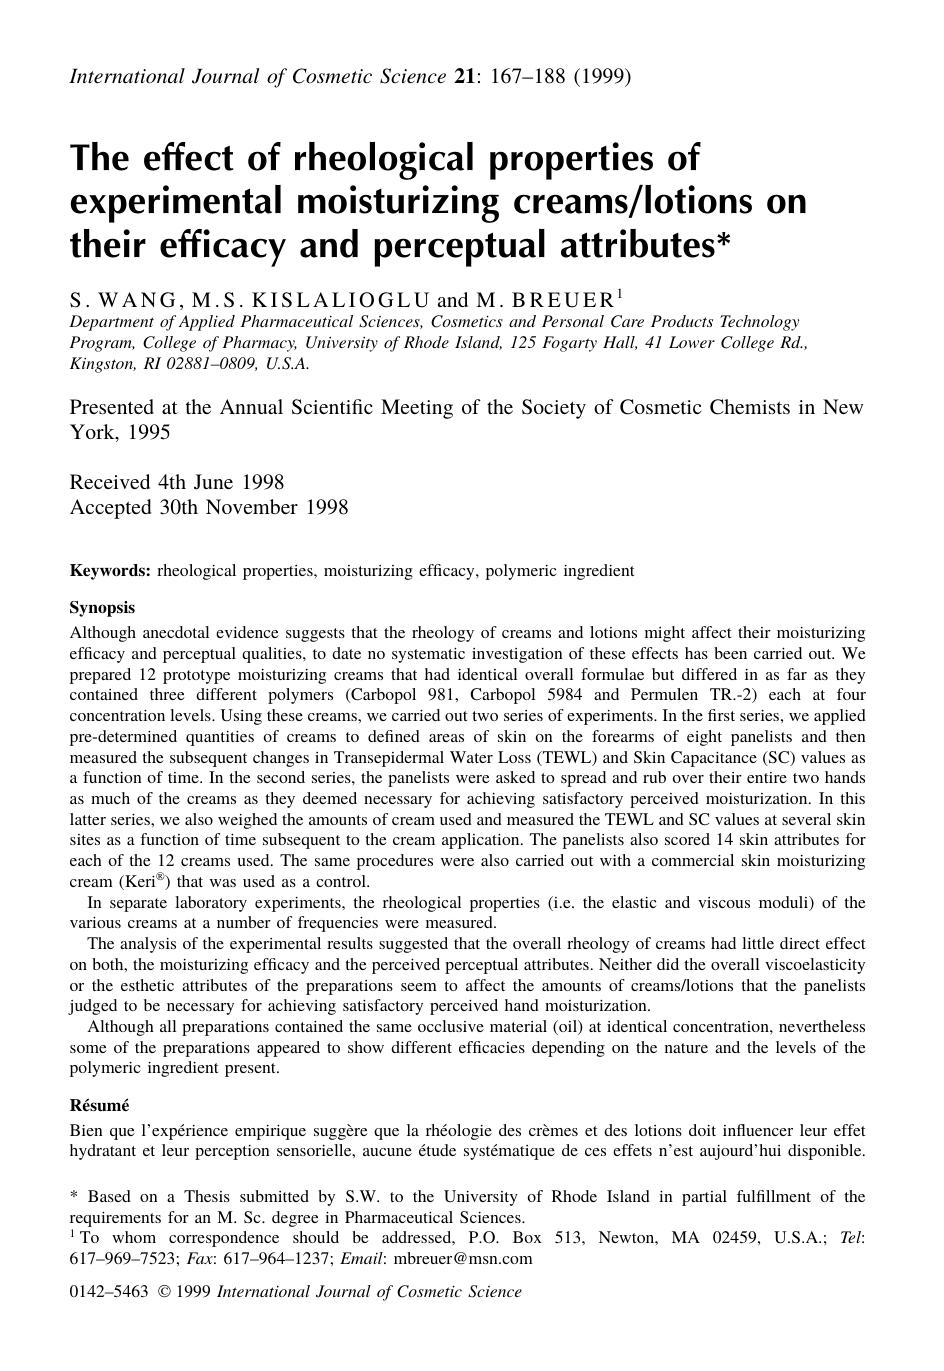 The Effect of Rheological Properties of Experimental Moisturizing CreamsLotions on Their Efficacy and Perceptual Attributes by S . WANG M .S . KISLALIOGLU & M . BREUER